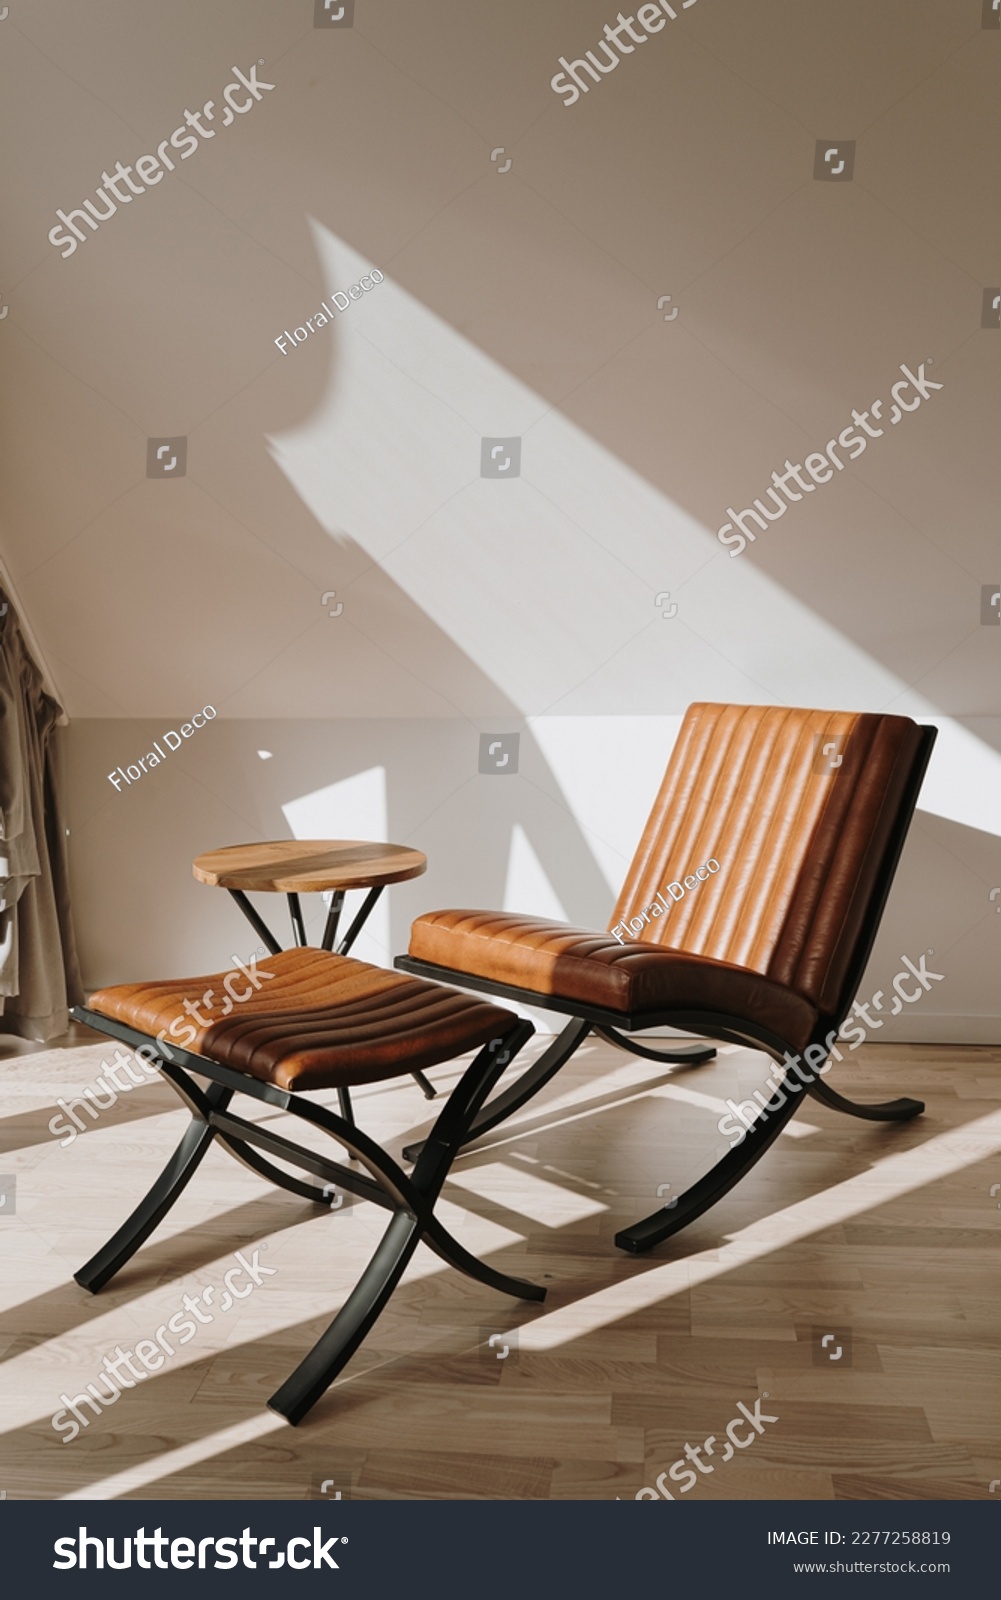 Modern interior decorated with leather lounge armchair. Aesthetic warm sunlight shadows on the wall. Minimalist home interior design concept #2277258819